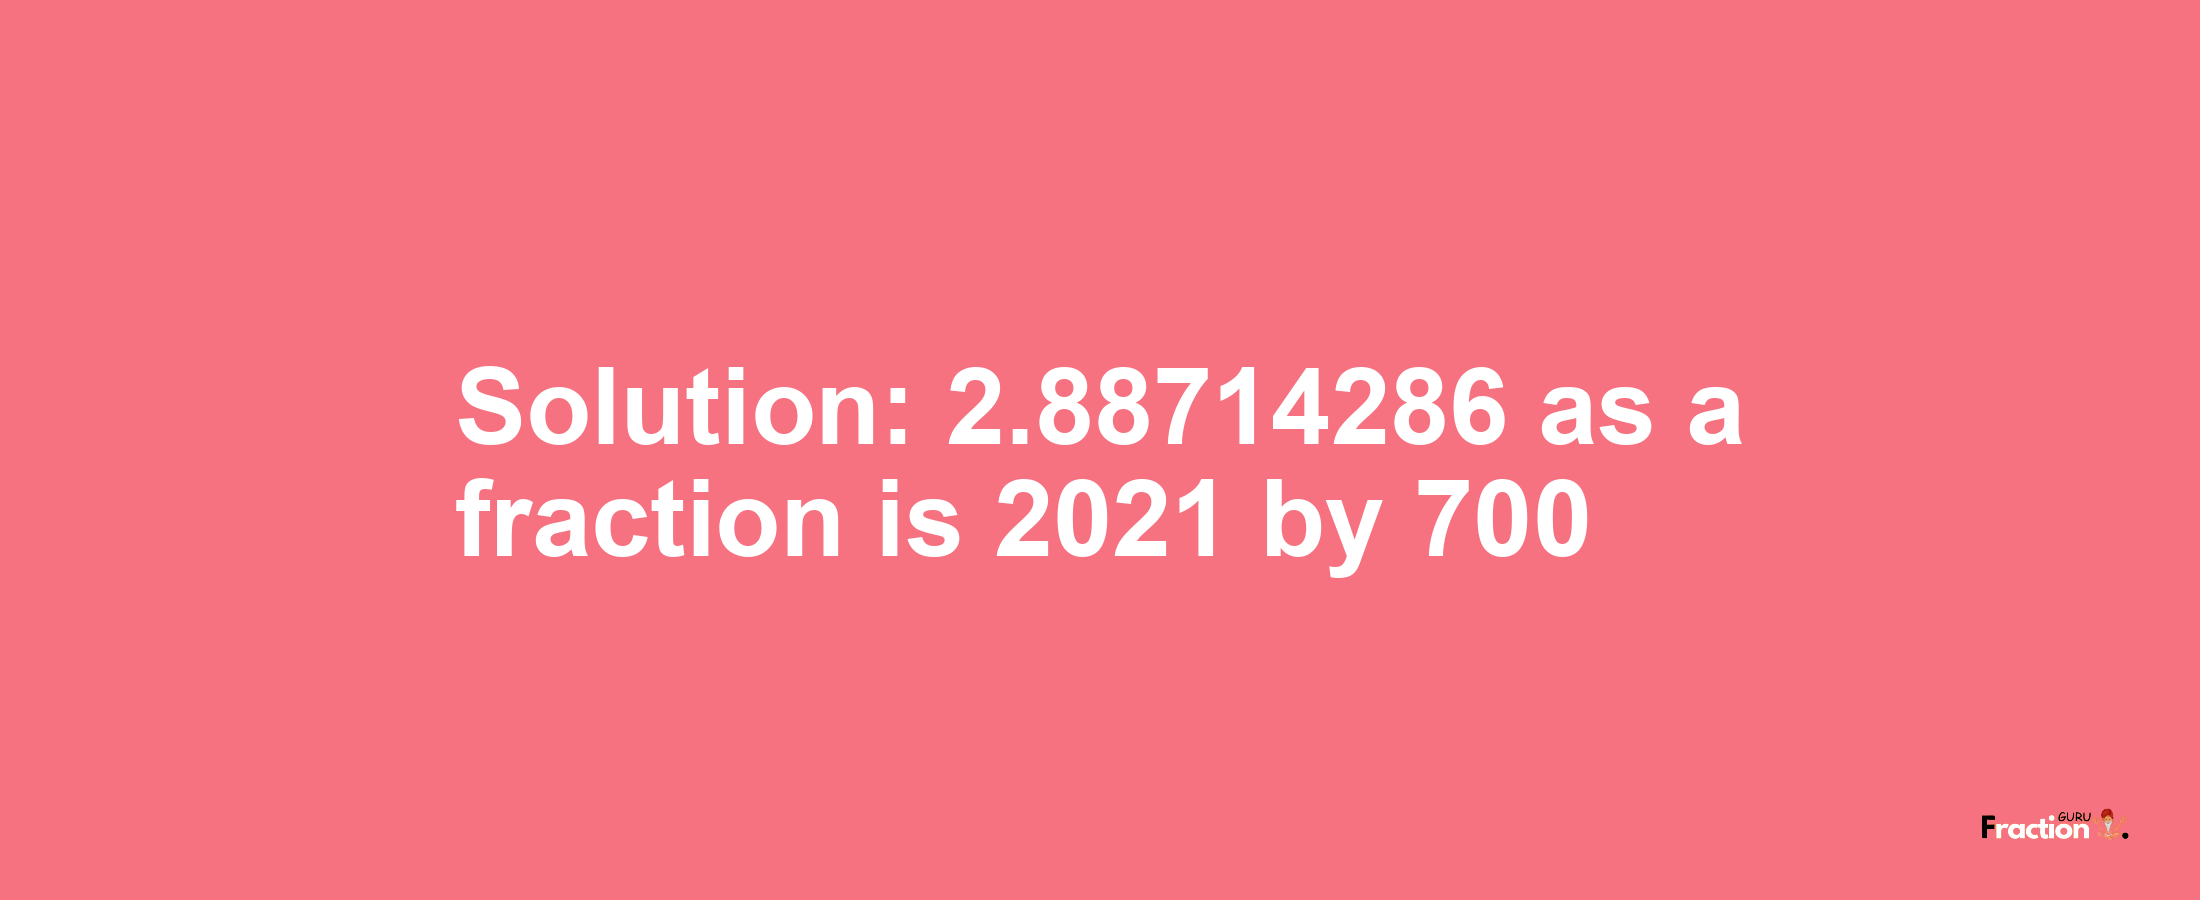 Solution:2.88714286 as a fraction is 2021/700